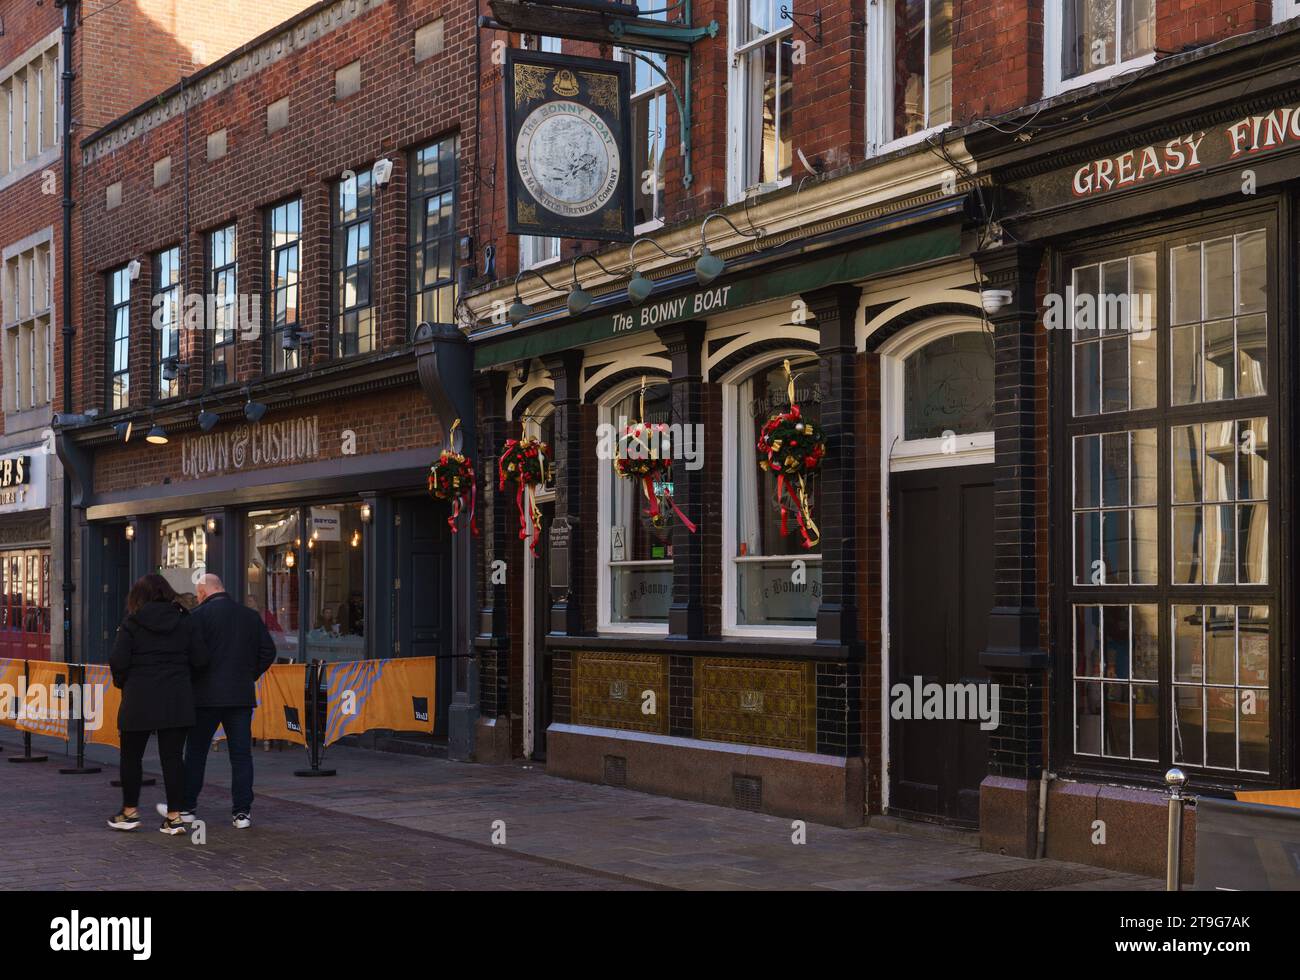 The Bonny Boat, Trinity House Lane, Hull Old Town, East Yorkshire, UK Stock Photo